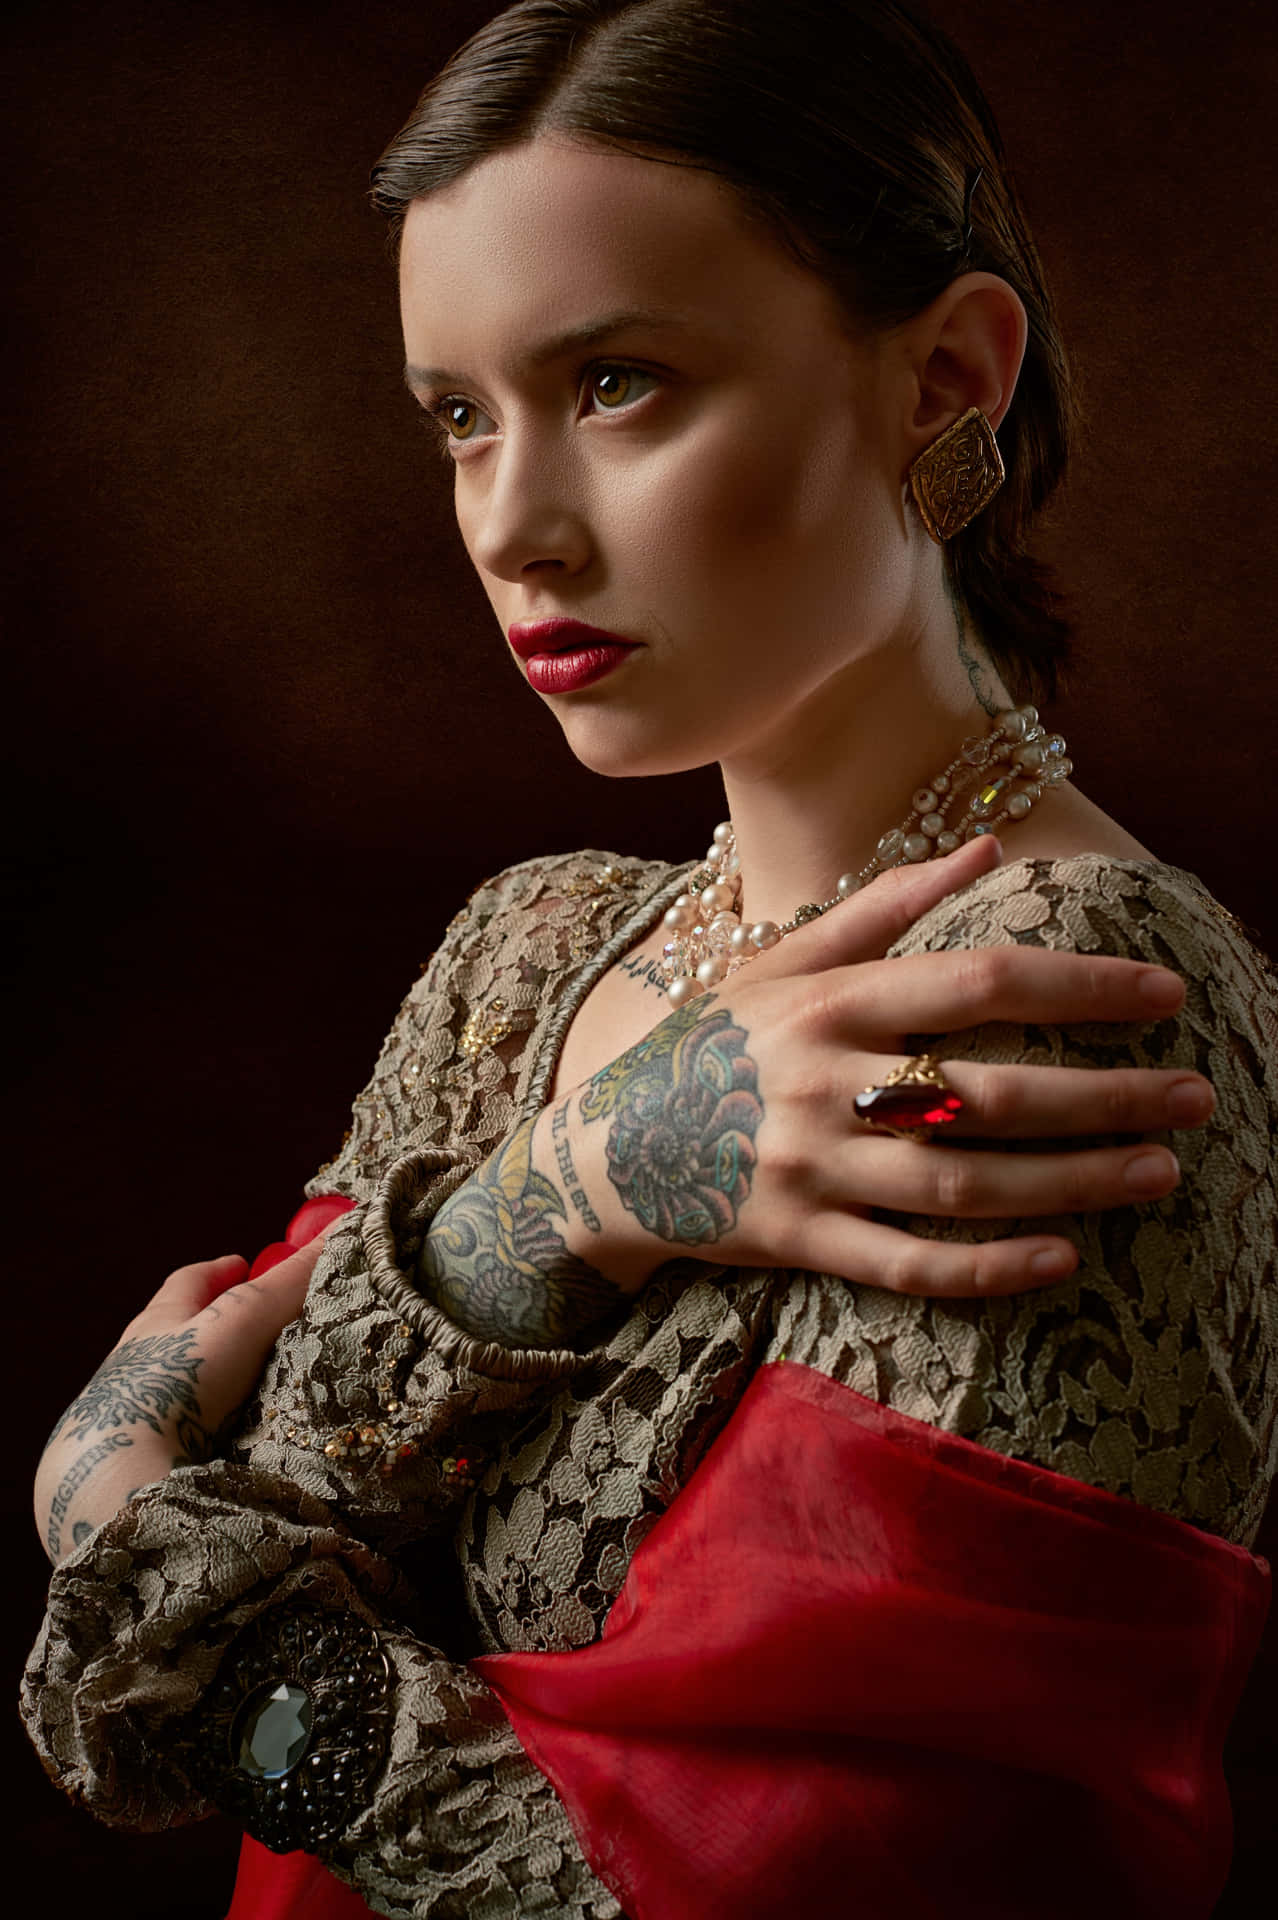 A Woman With Tattoos